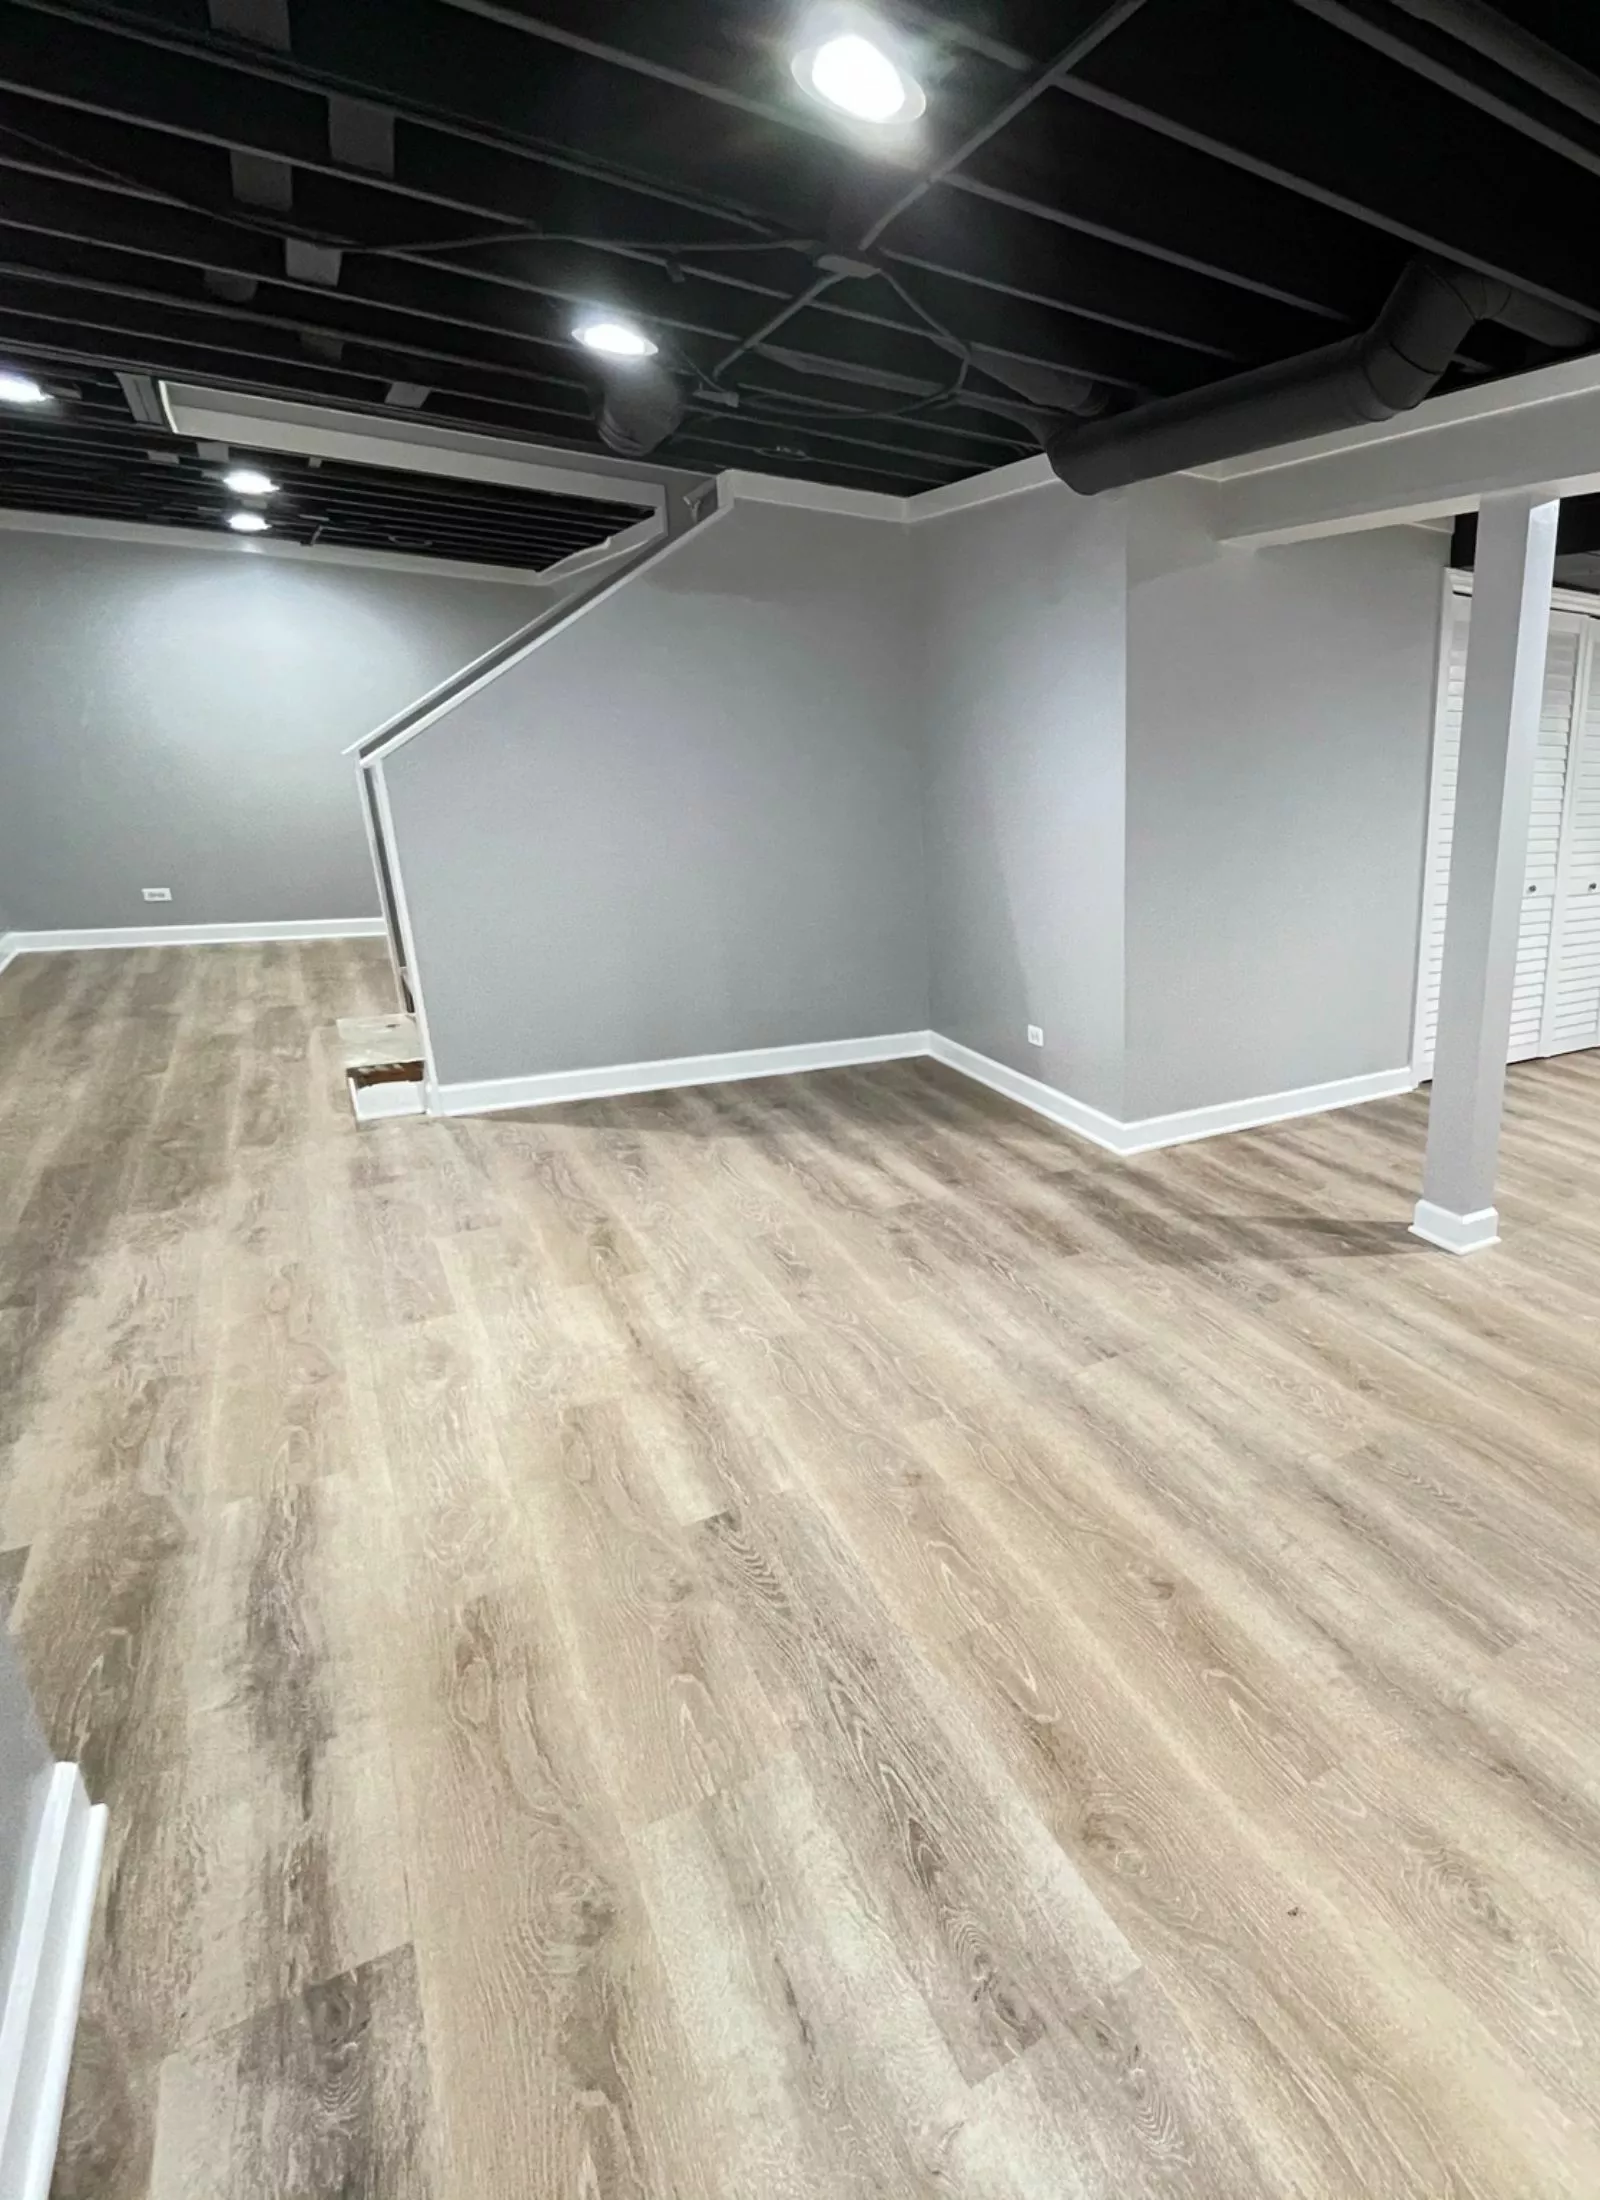 A basement with wood floors and white walls.